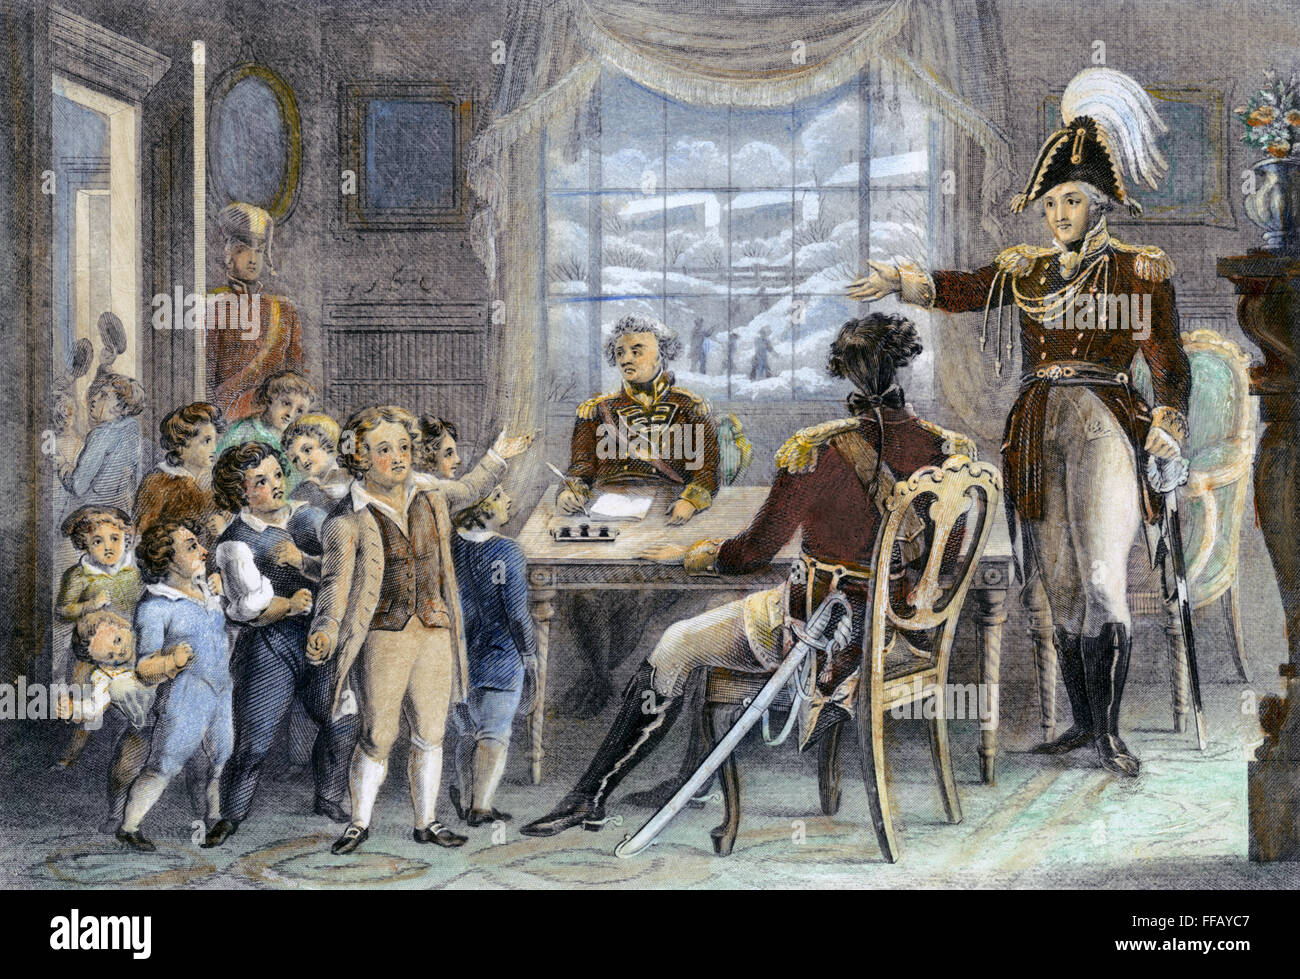 THOMAS GAGE (1721-1787). /nEnglish general and colonial governor of Massachusetts. Governor Gage, far right, telling his officers to allow the children of Boston to sled and ice skate on Boston Common, and to punish any British soldier who hindered them, Stock Photo